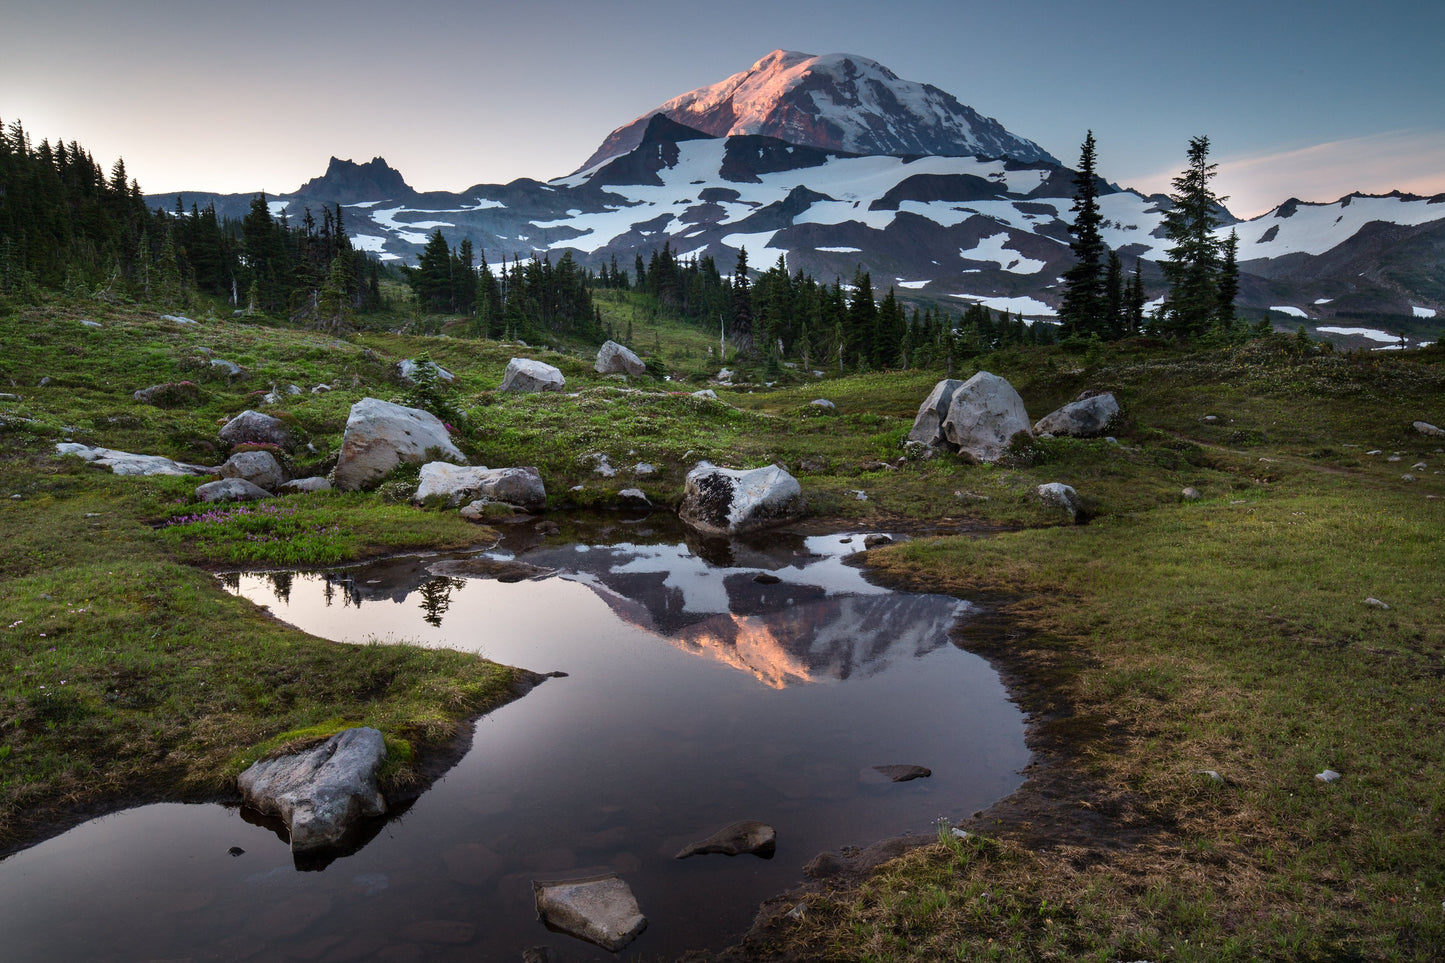 Morning after a thunderstorm at Mt. Rainier in Washington